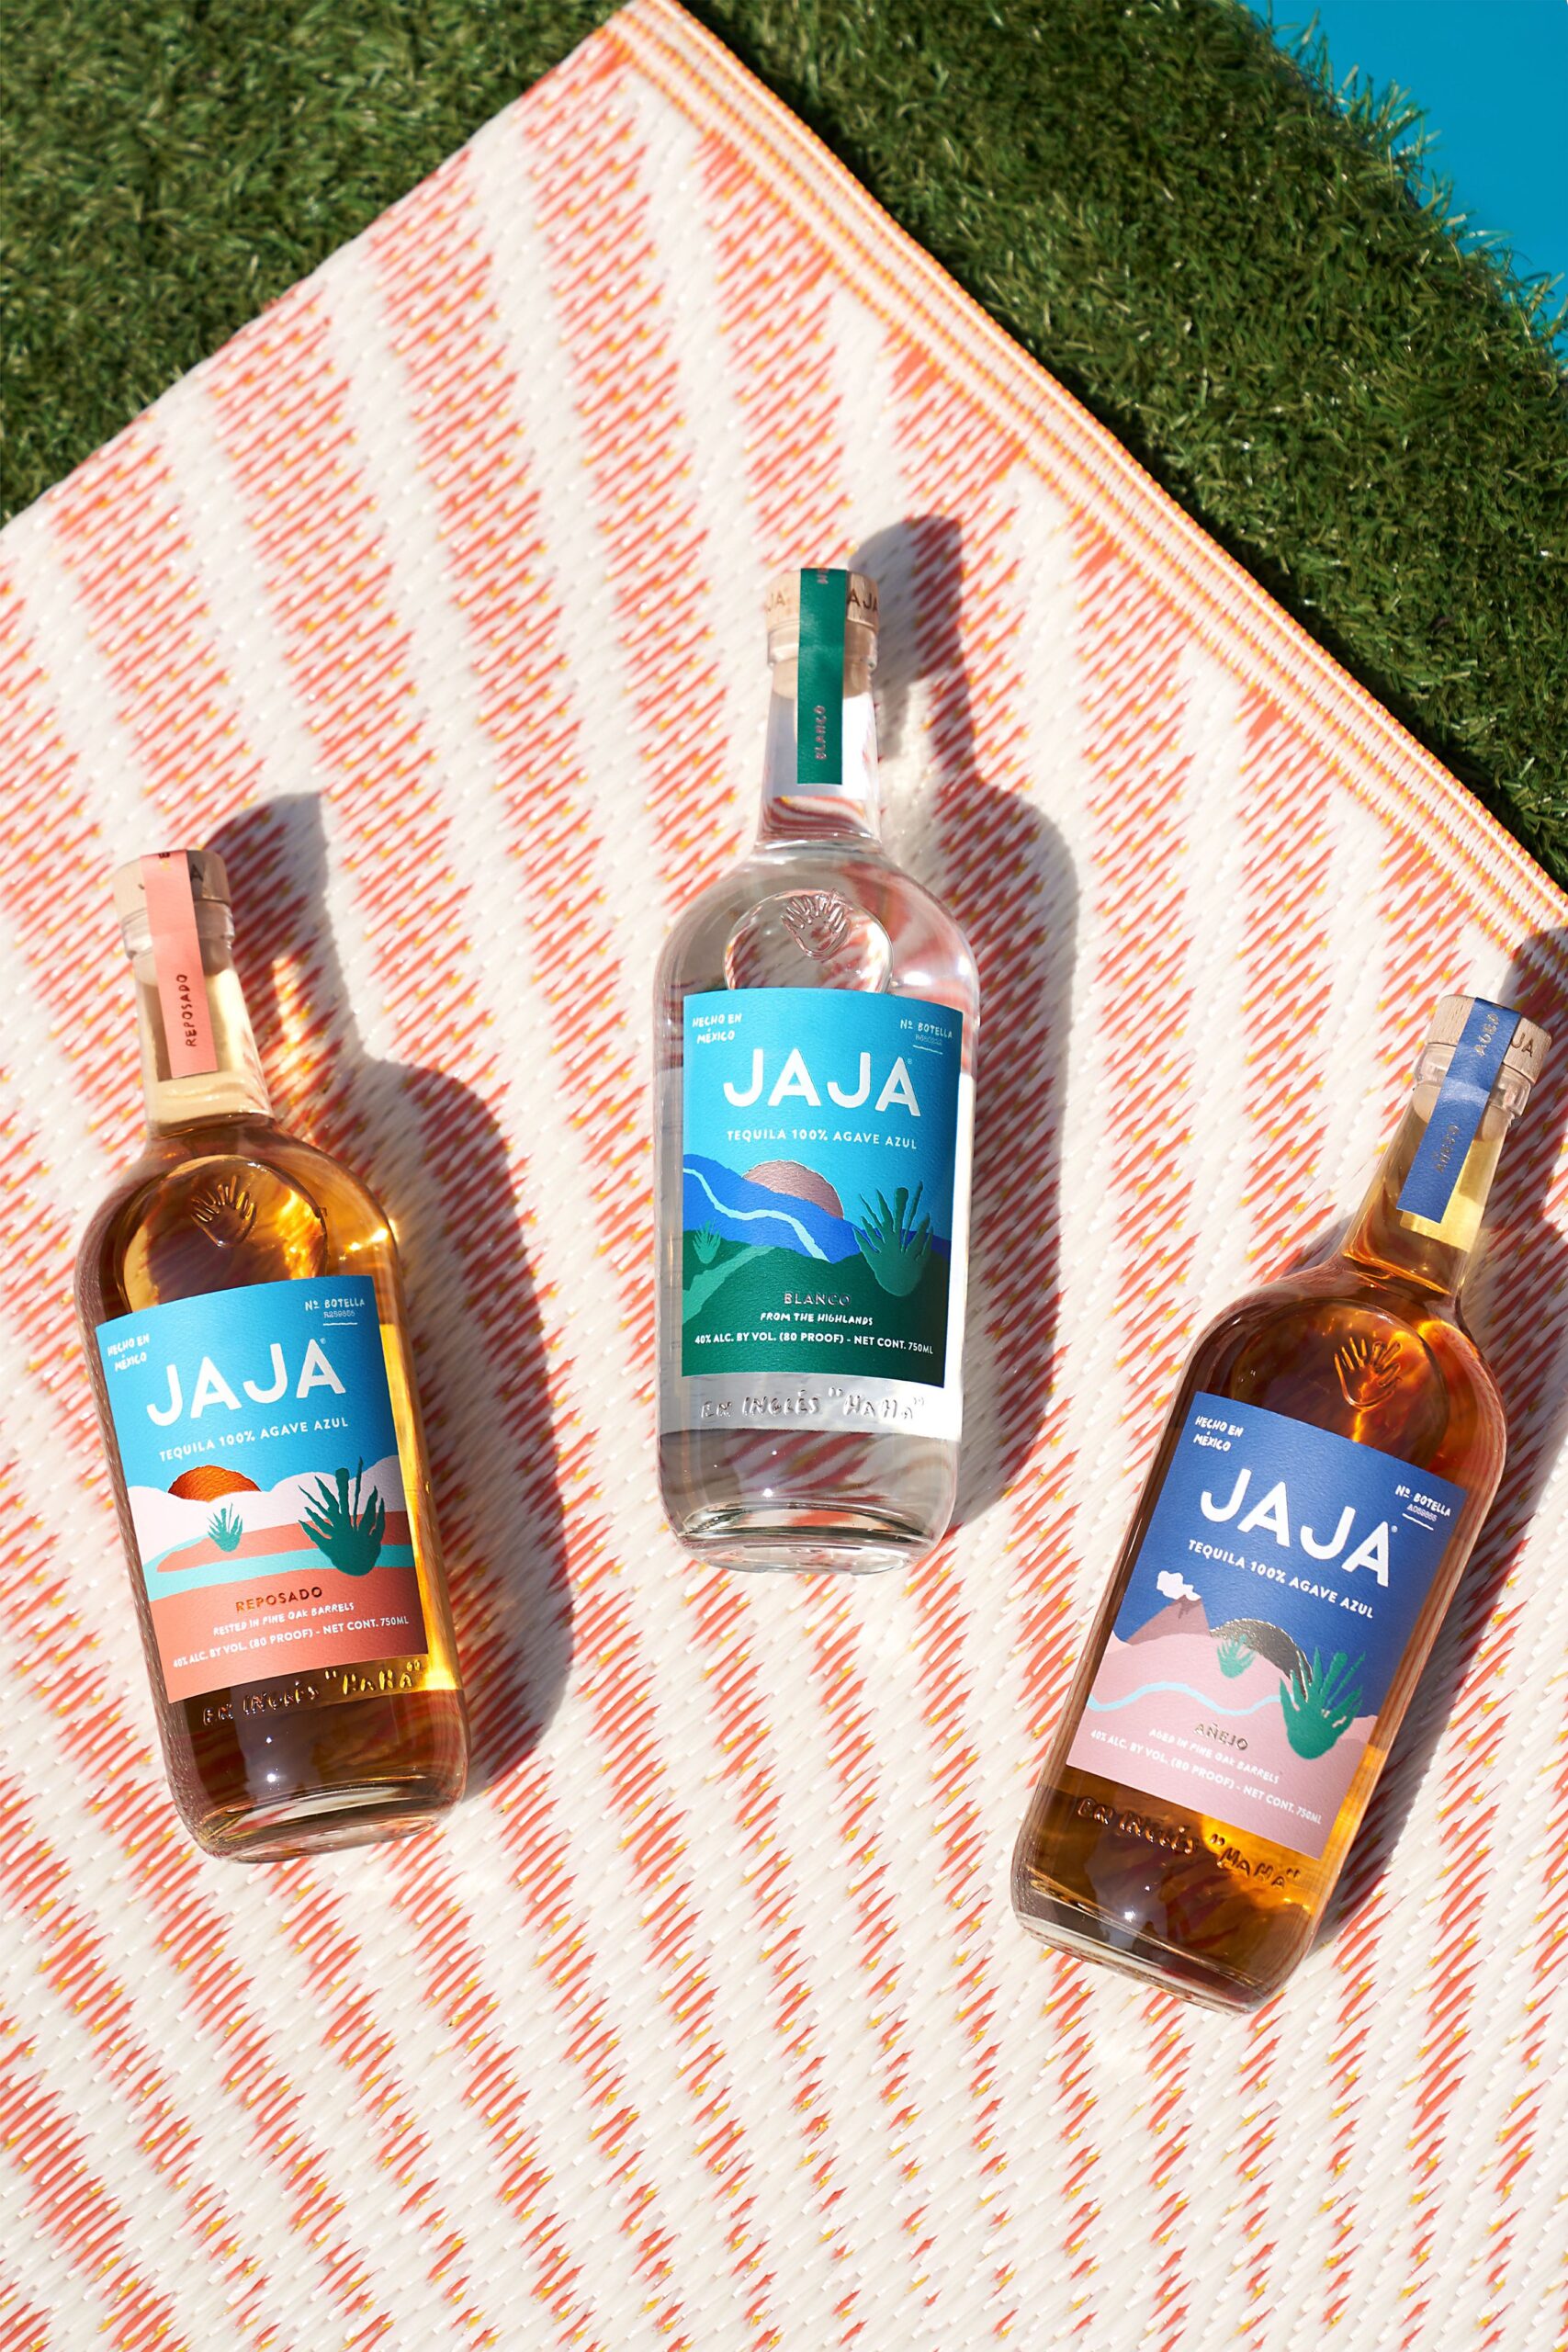 Jaja Tequila: A Packaging Design Inspired by Mexican Sunsets and Abstract Art